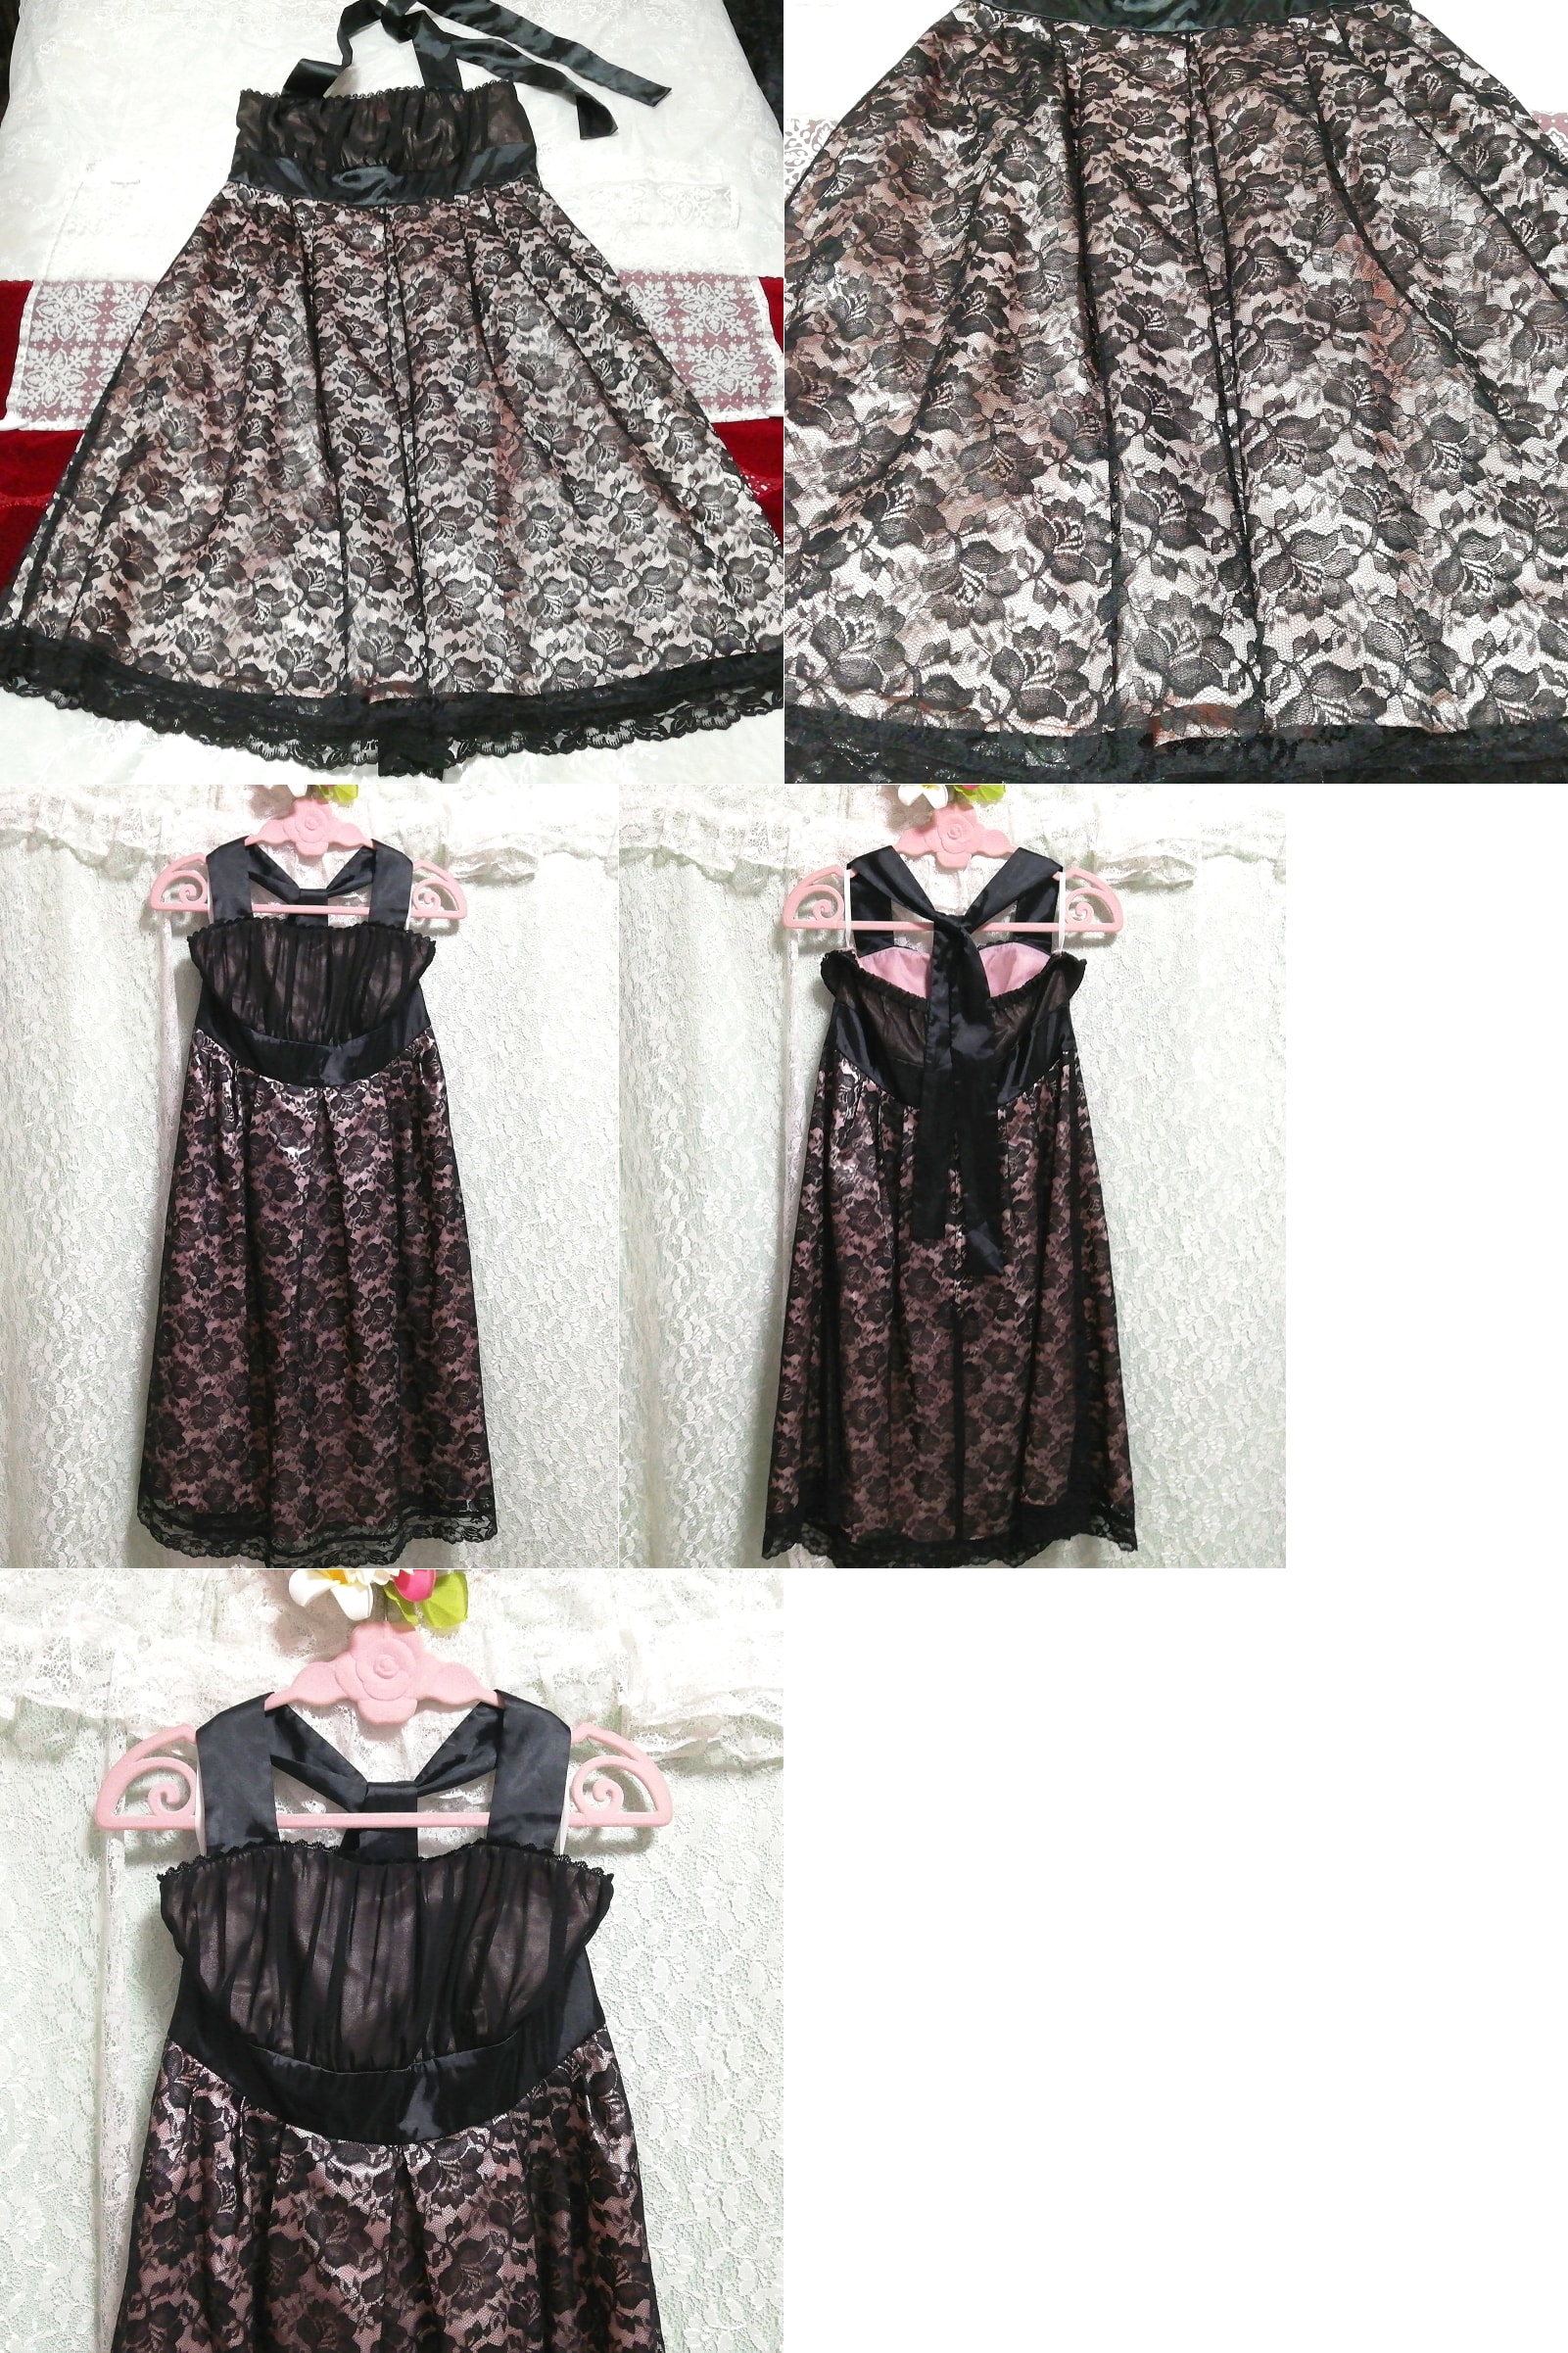 black rose lace negligee nightgown dress, knee length skirt, m size